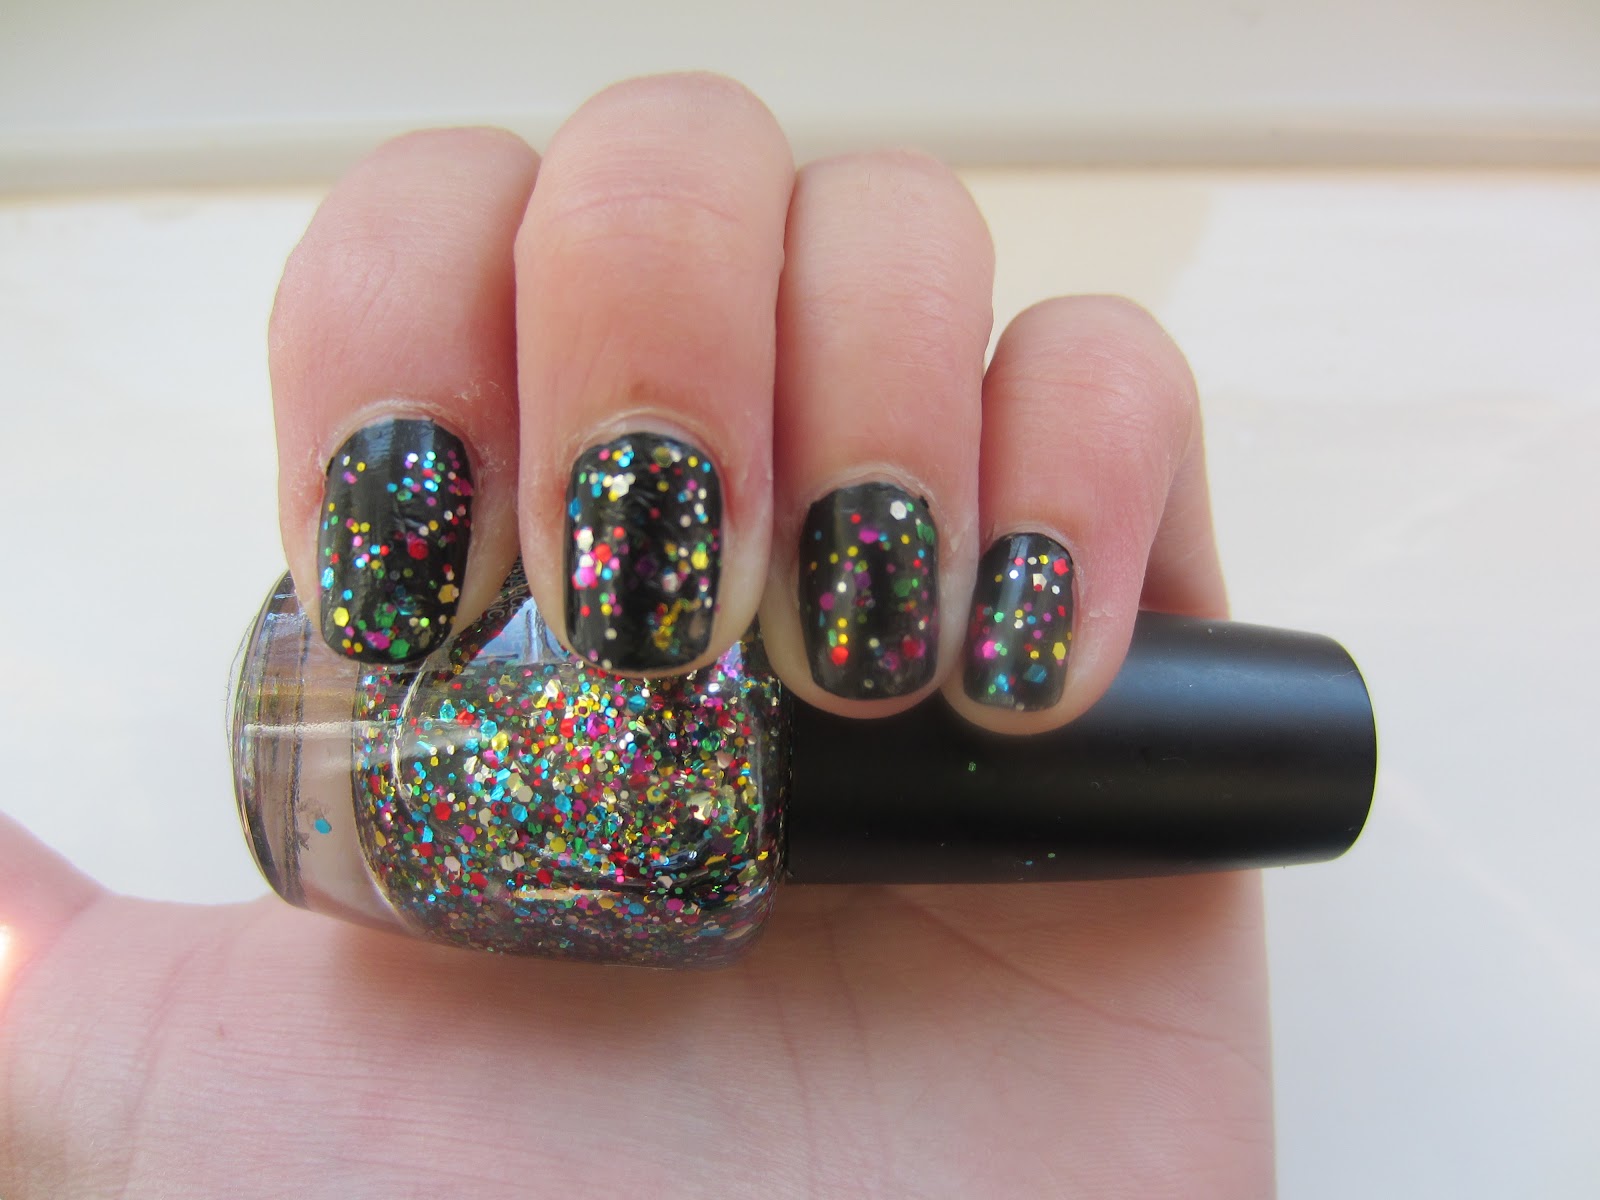 3. Glittery Panic at the Disco nails - wide 3